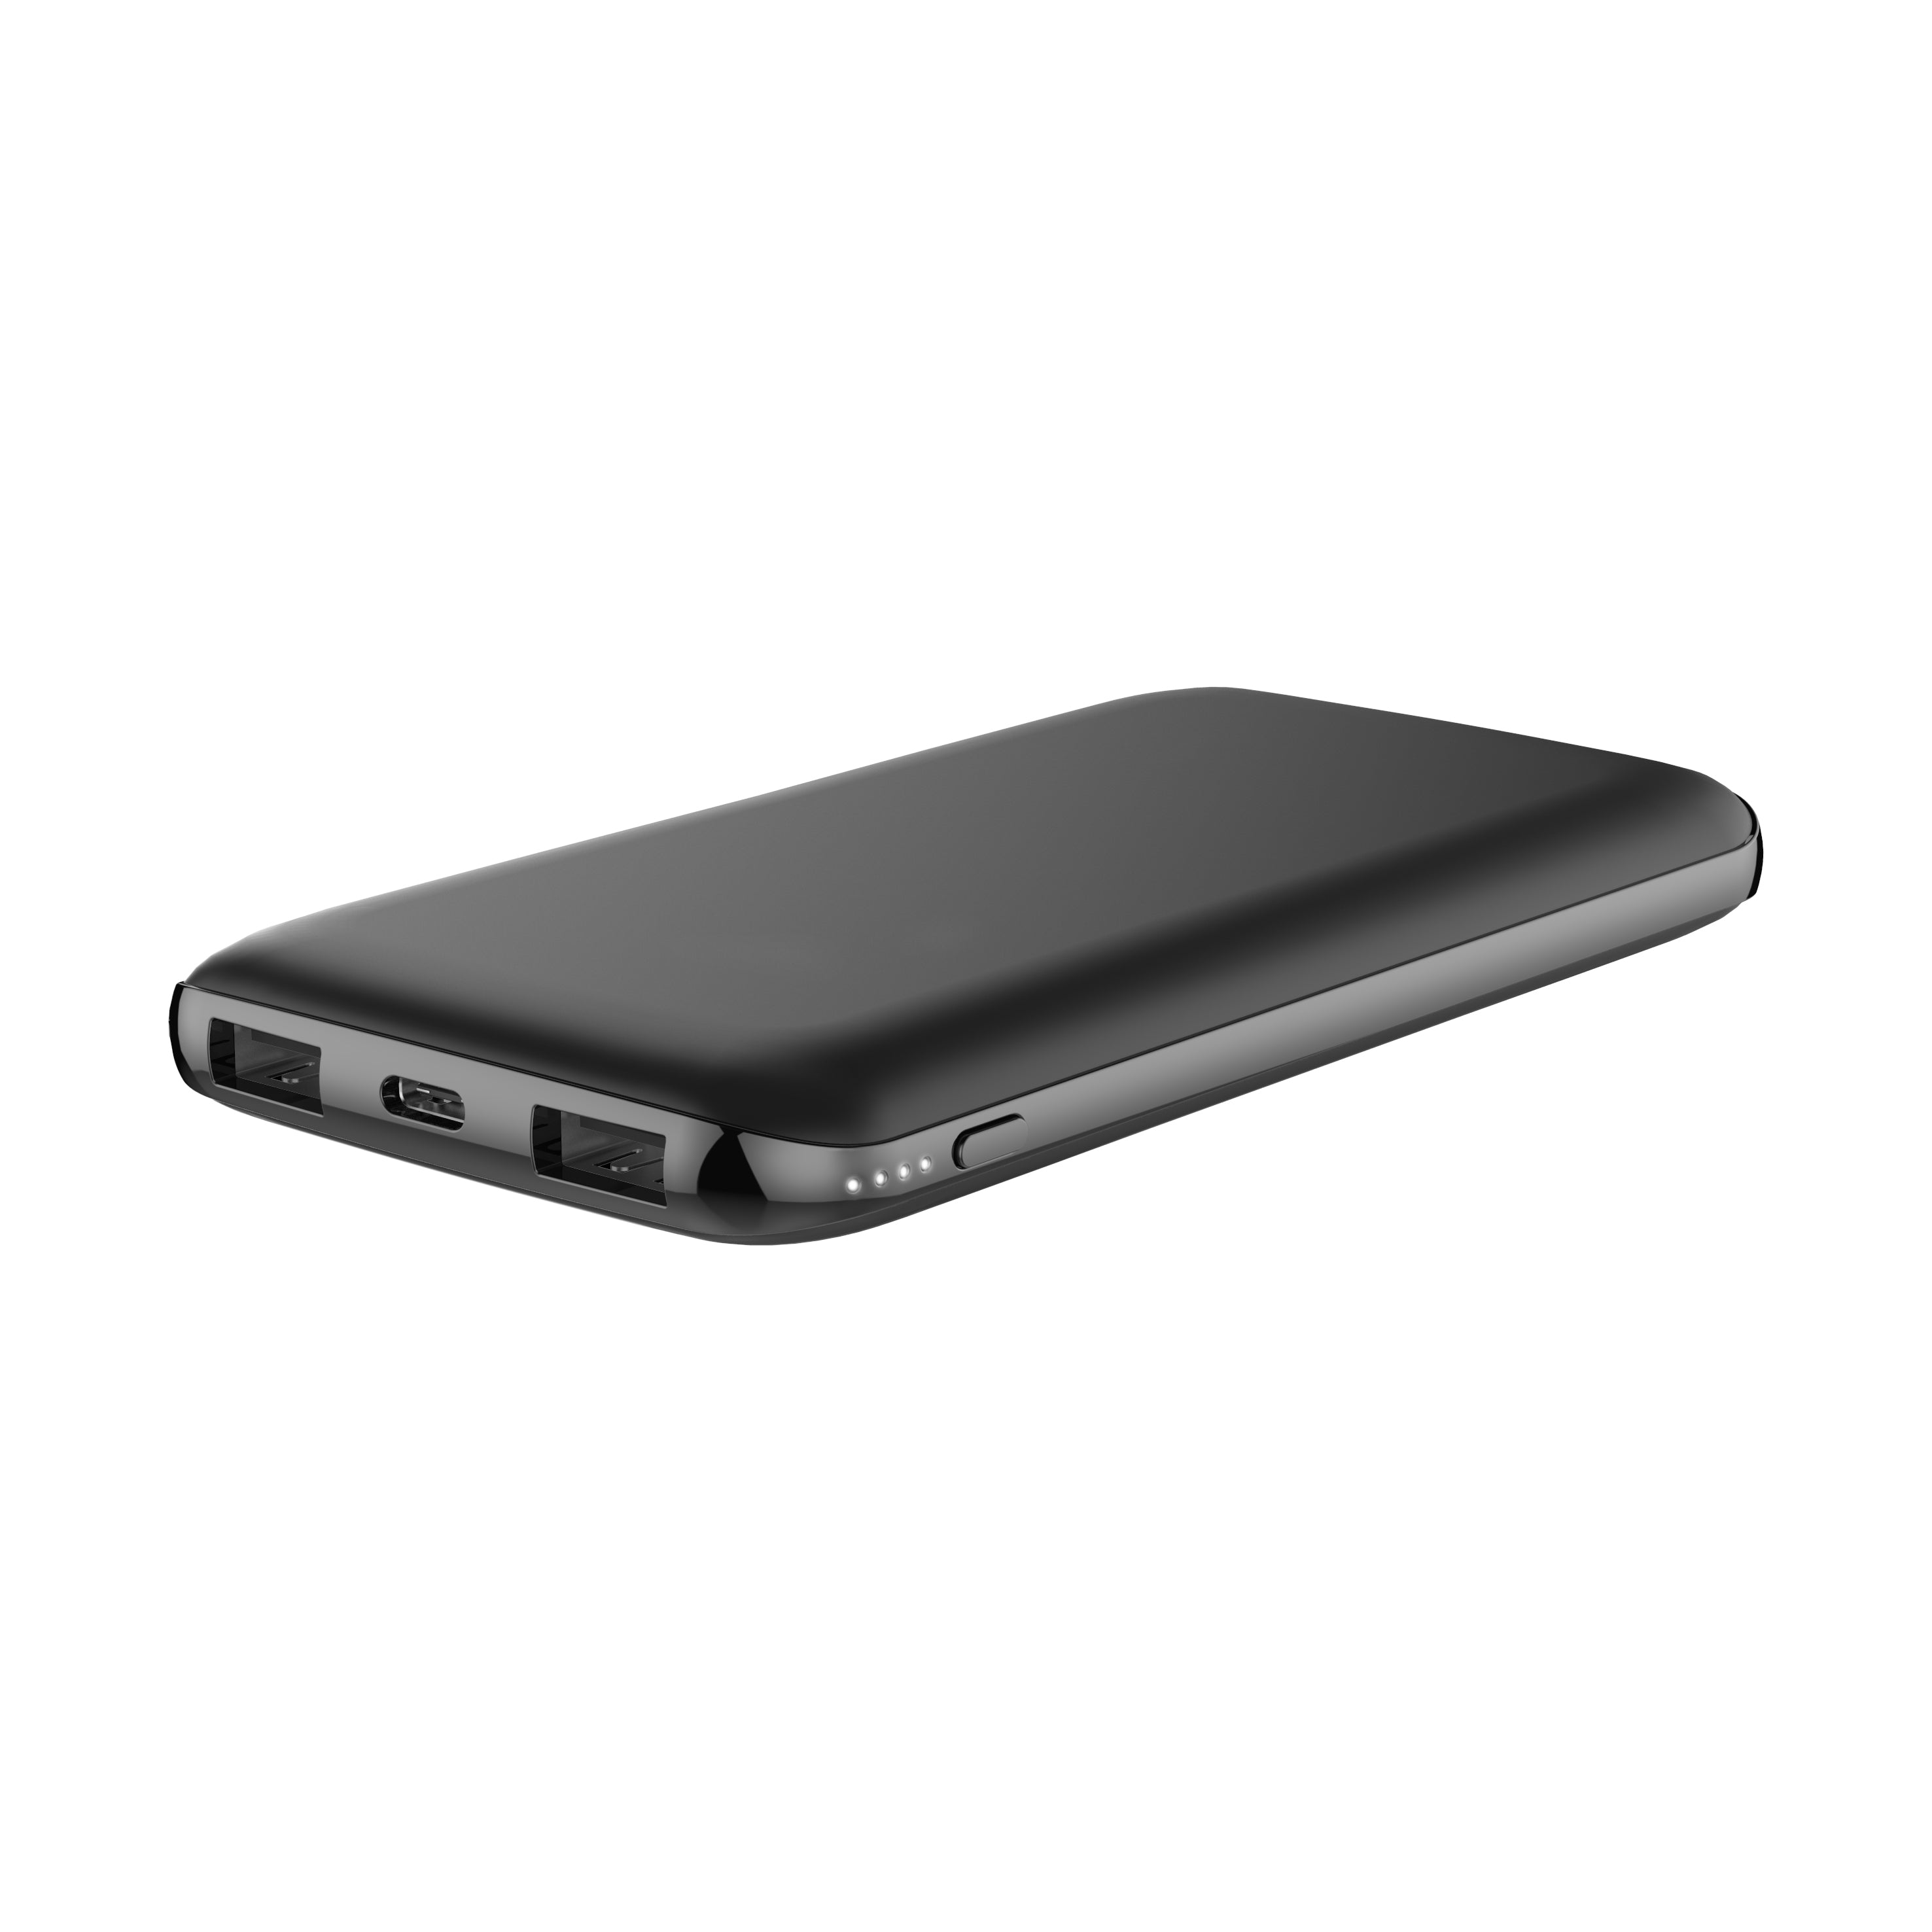 REF Power Fast Charge "C-Port" Portable Power Bank in Black